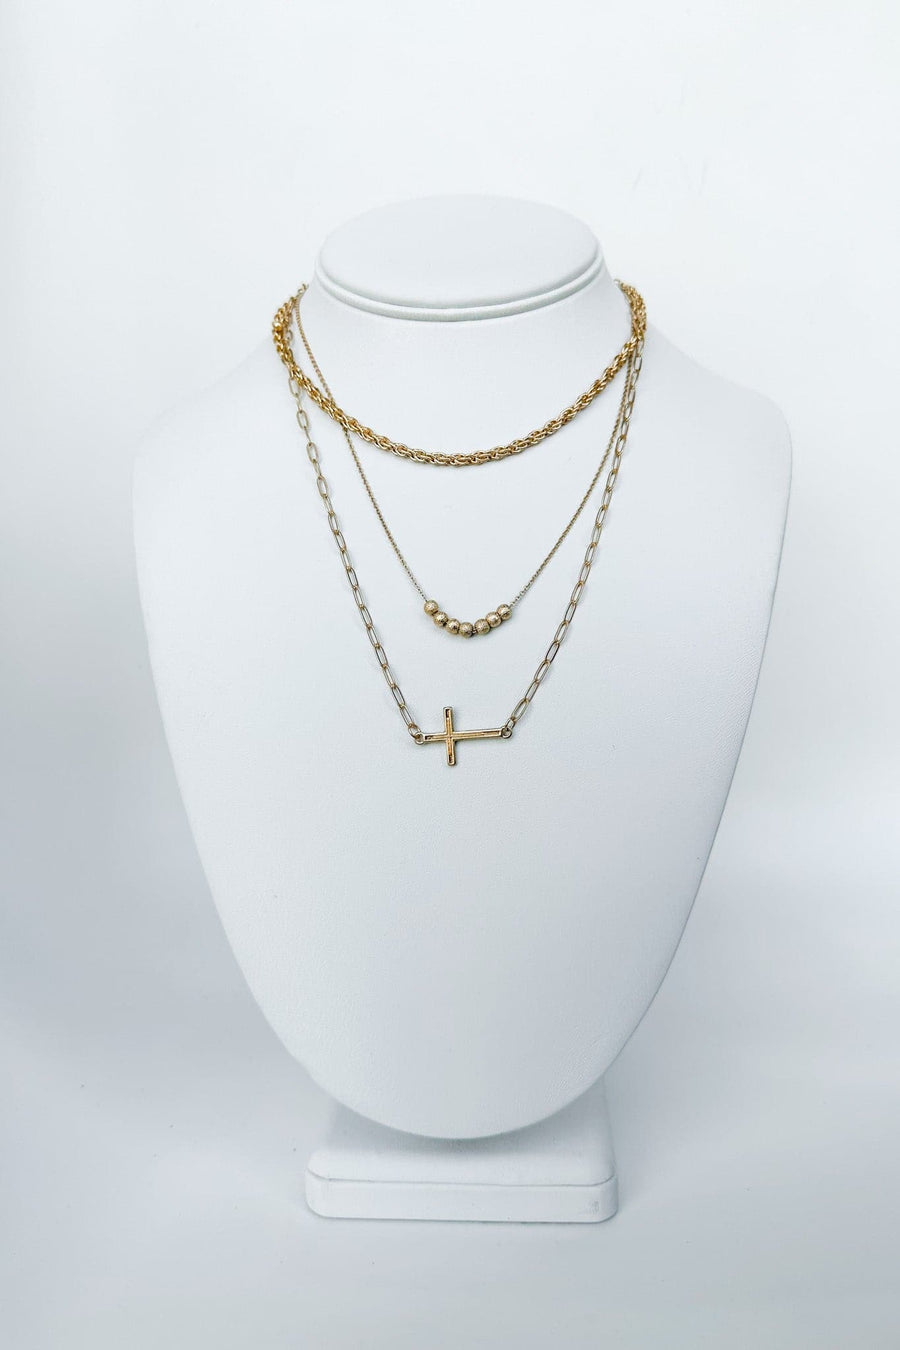 Gold Pomeline Cross Chain Layered Necklace - FINAL SALE - Madison and Mallory